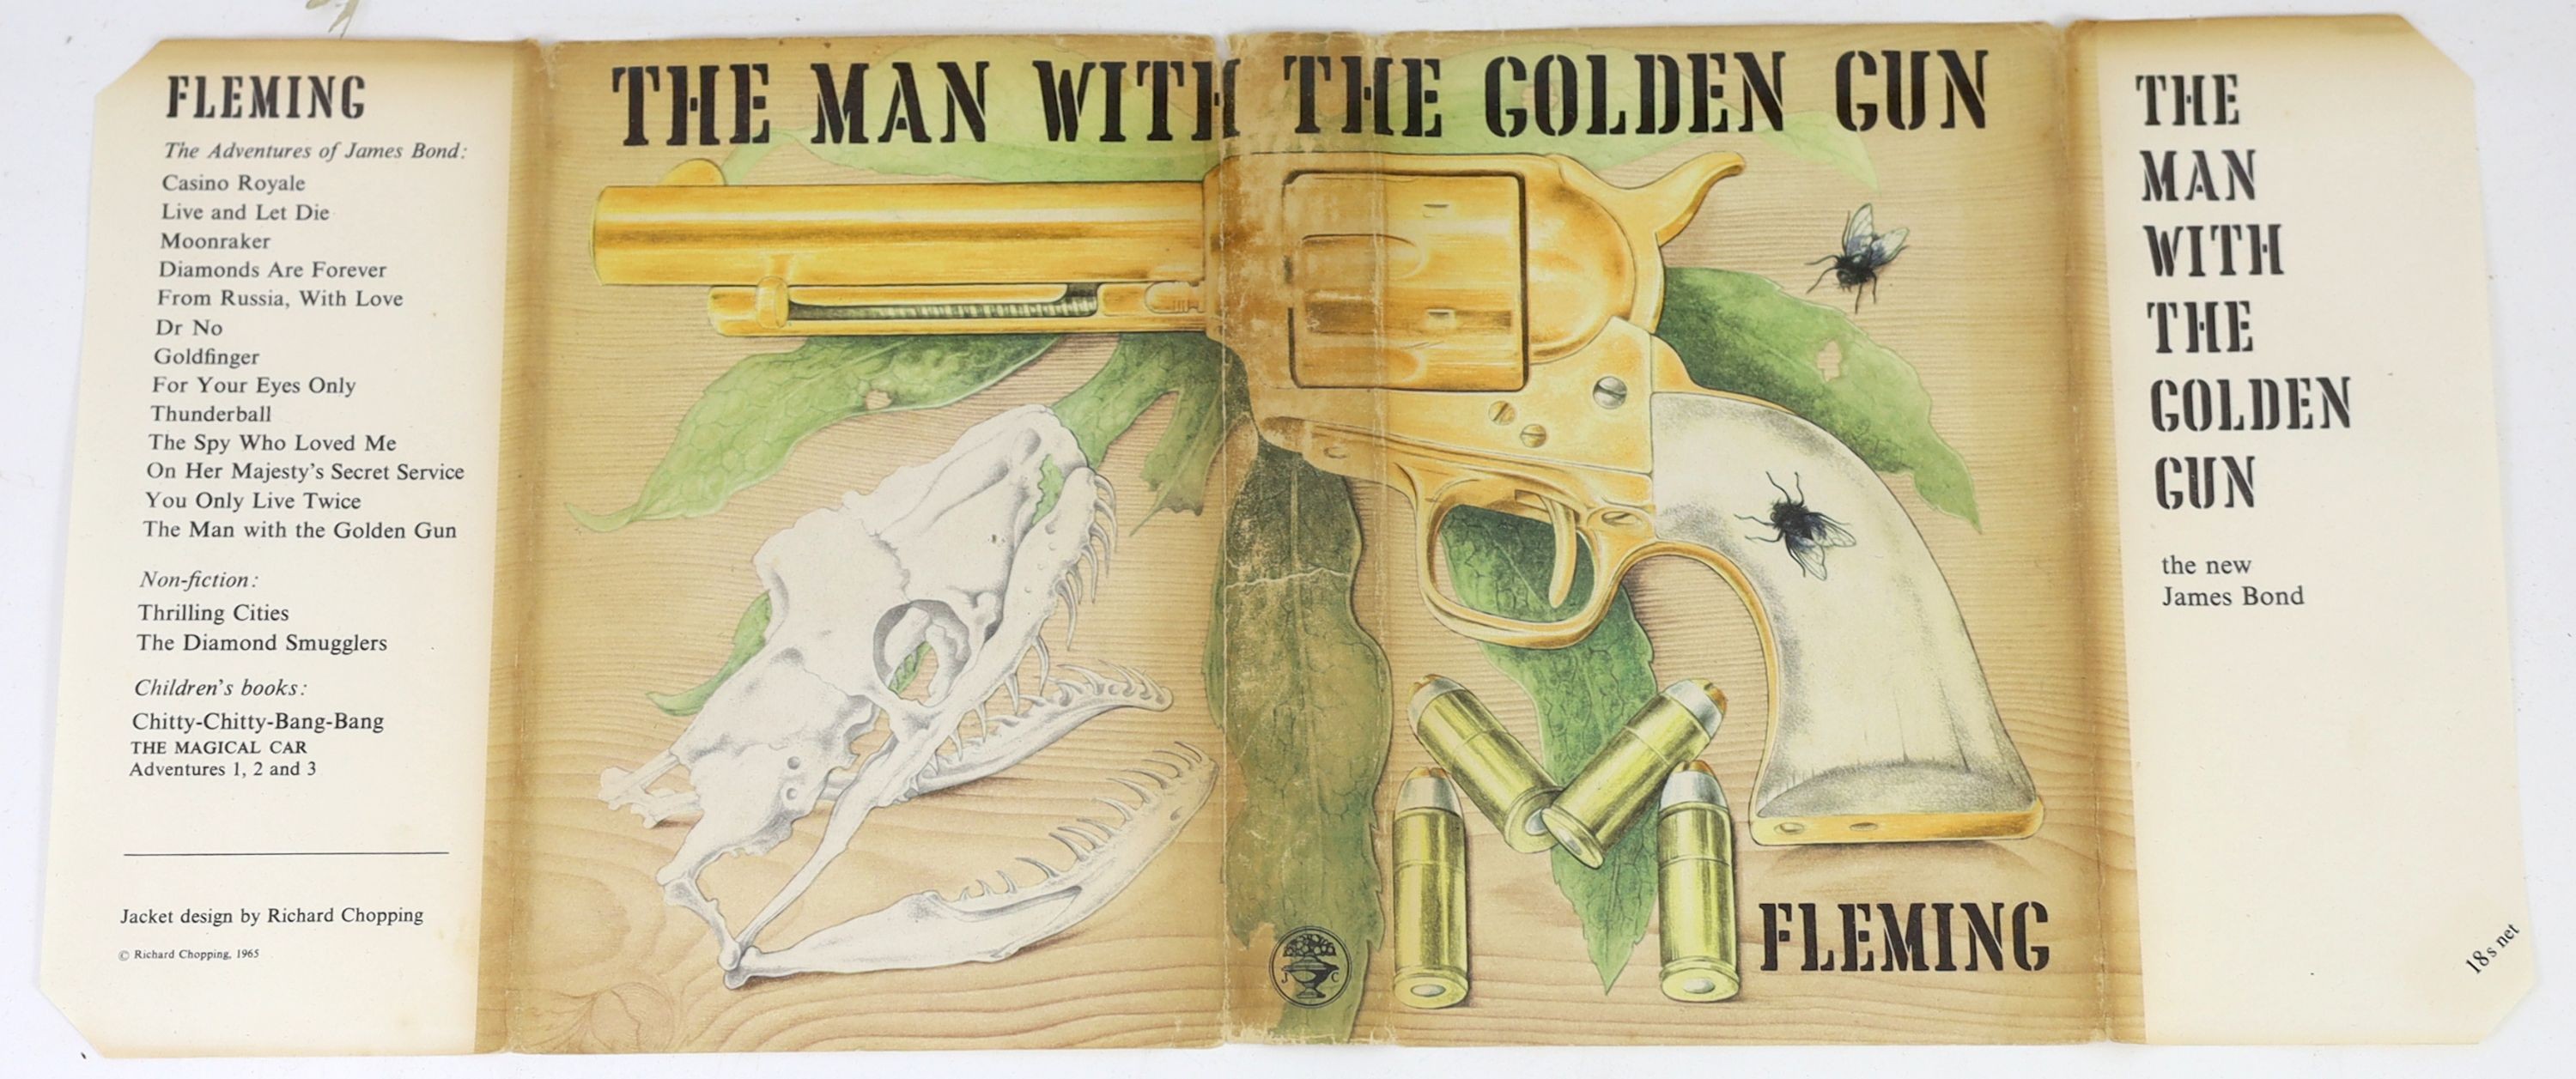 Fleming, Ian - The Man with the Golden Gun, 1st edition, cloth, with unclipped d/j, Johnathan Cape, London, 1965